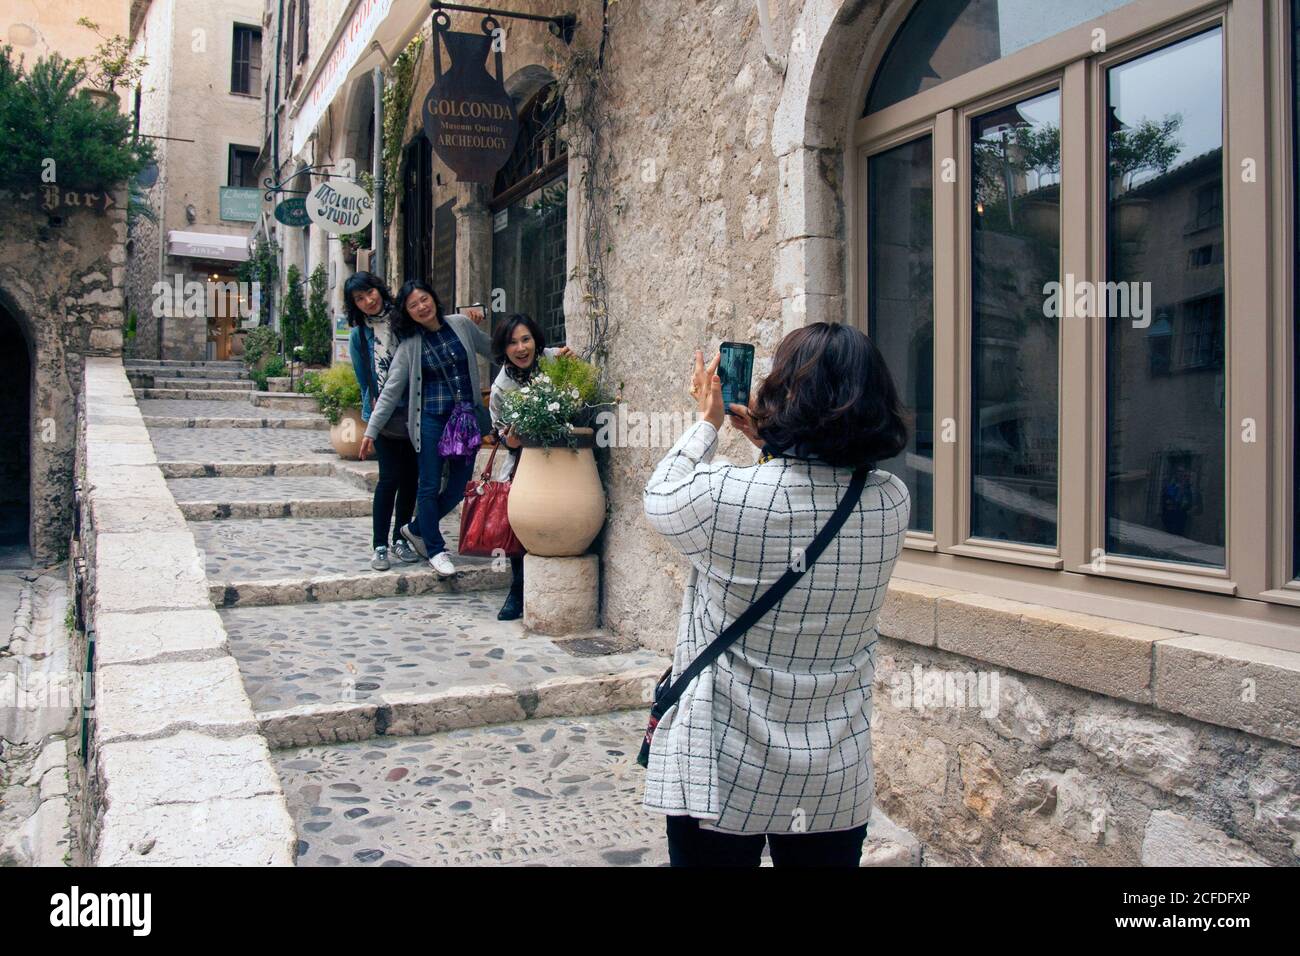 Saint-Paul-de-Vence France Group selfie. Snapshot of three graces. Japanese girl is taking a picture of her girlfriends in the old town. Stock Photo